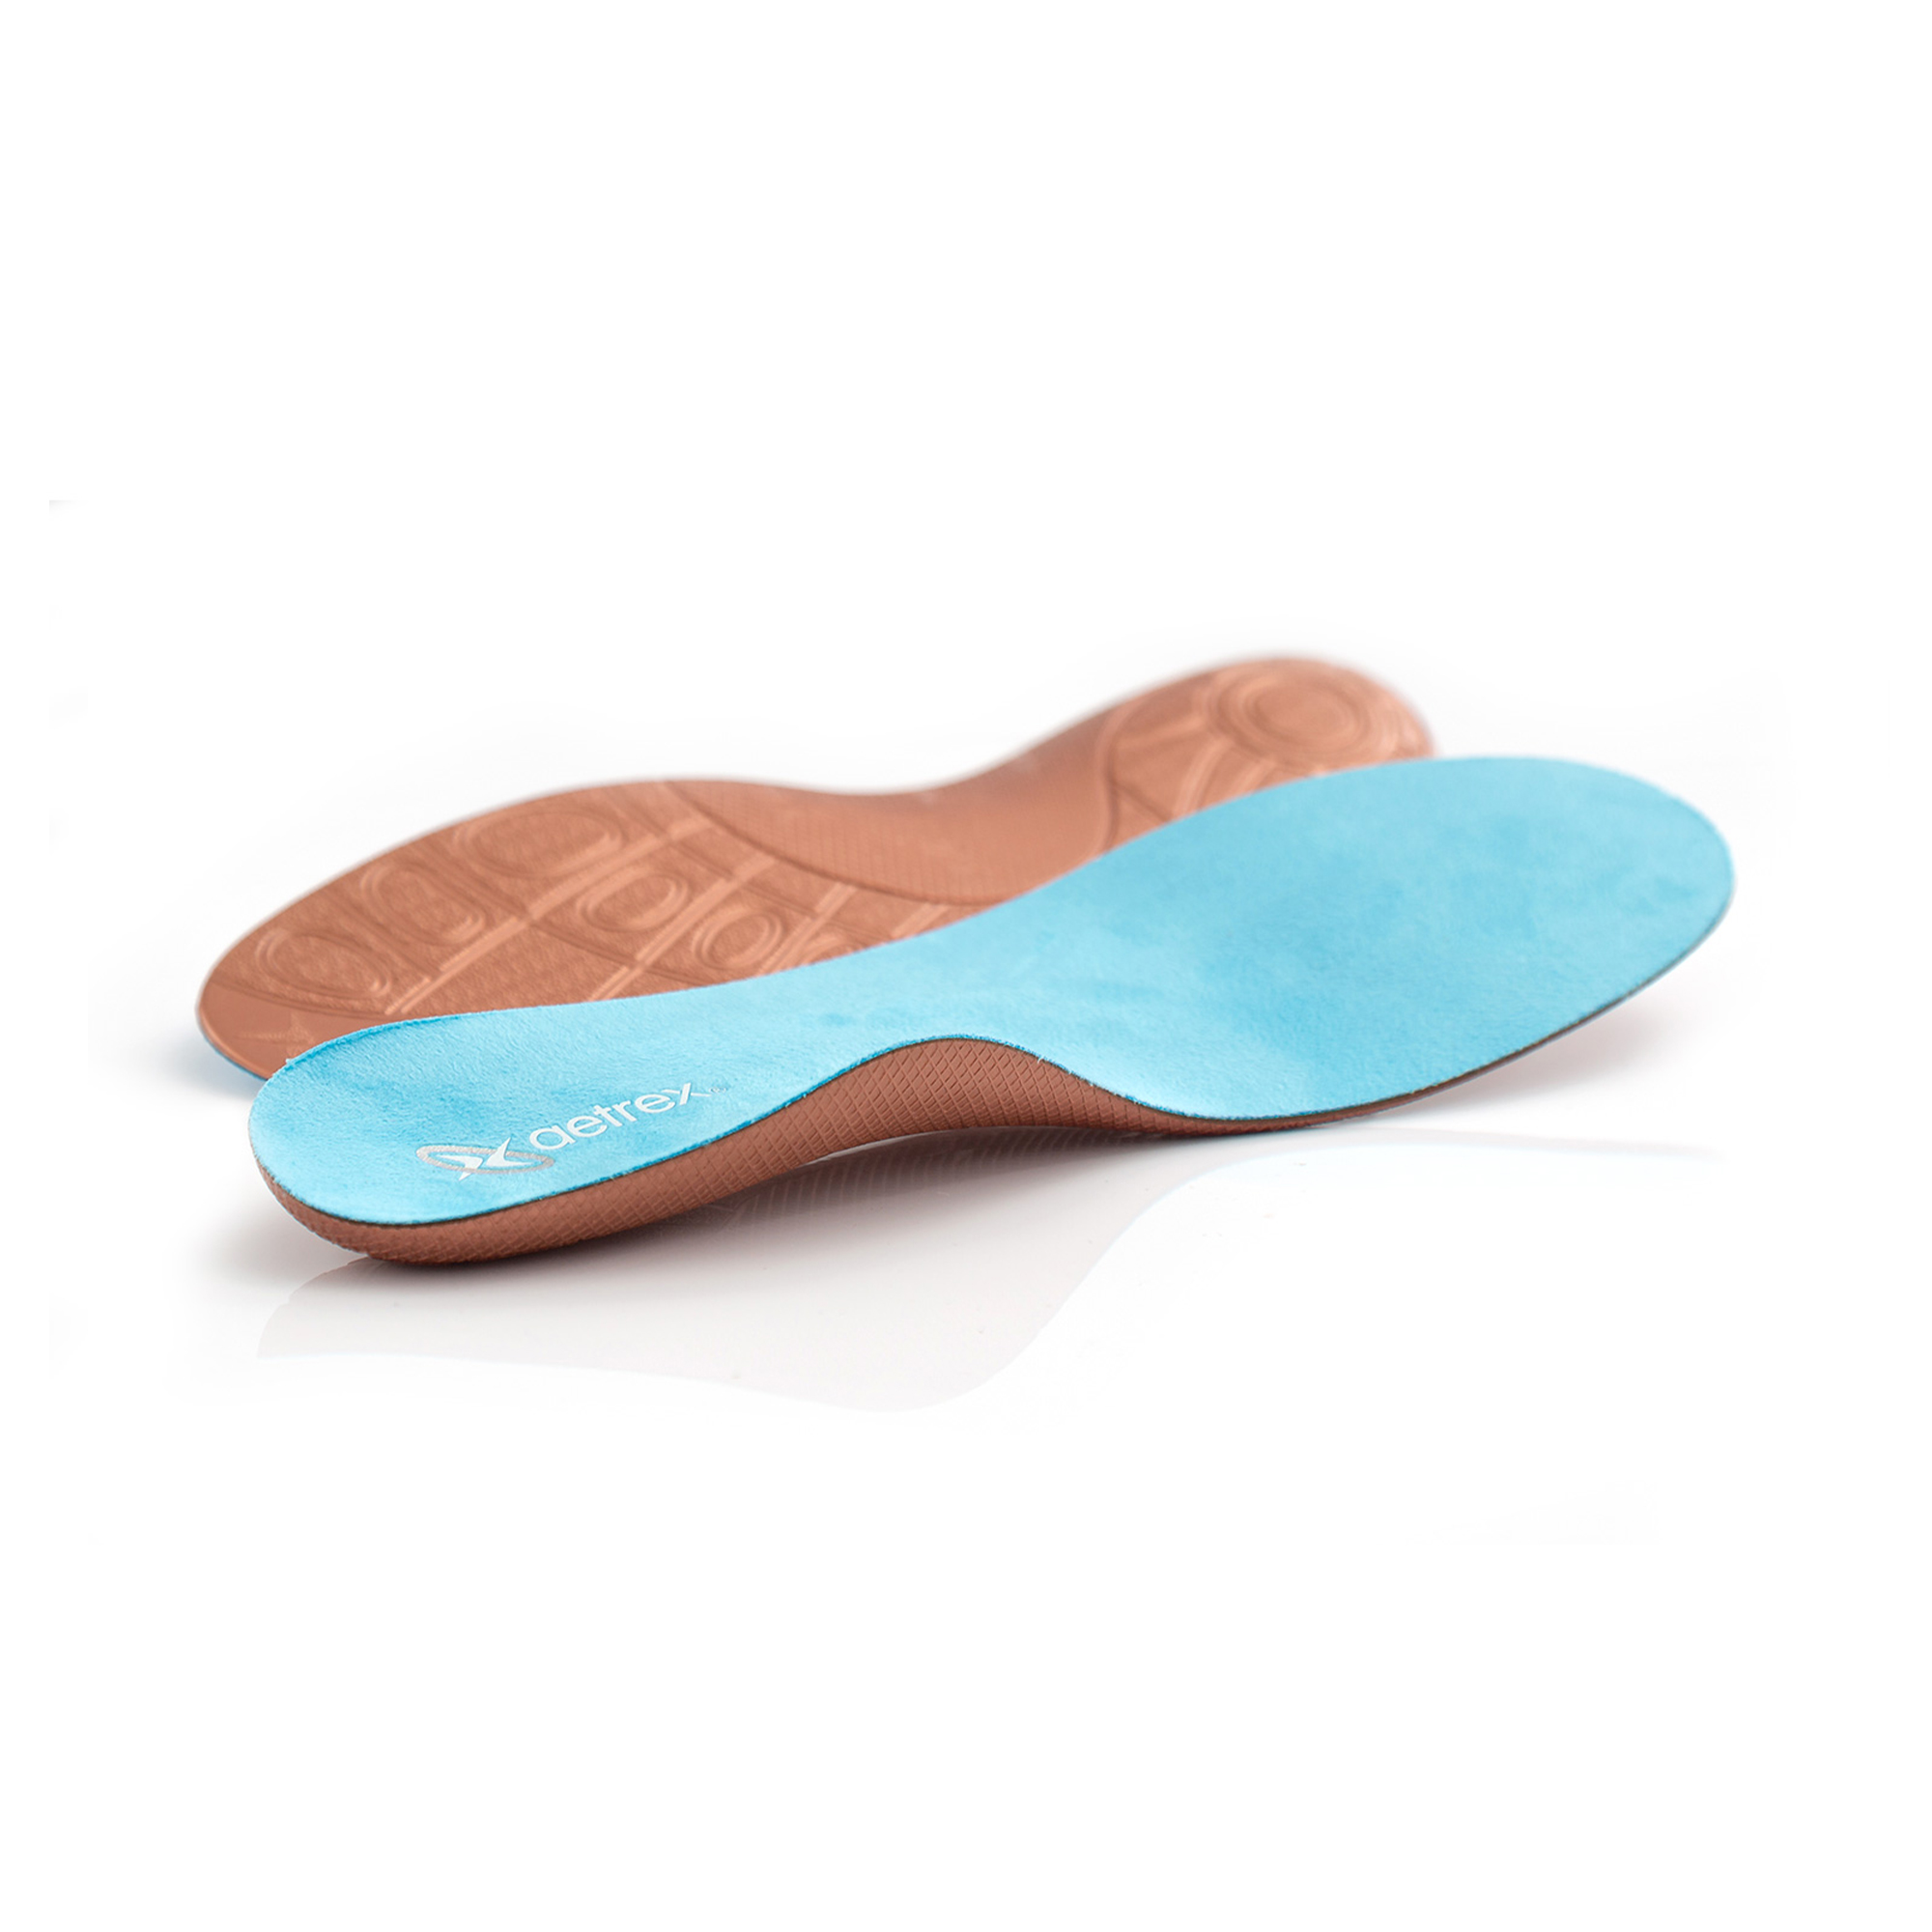 thin insoles for boots